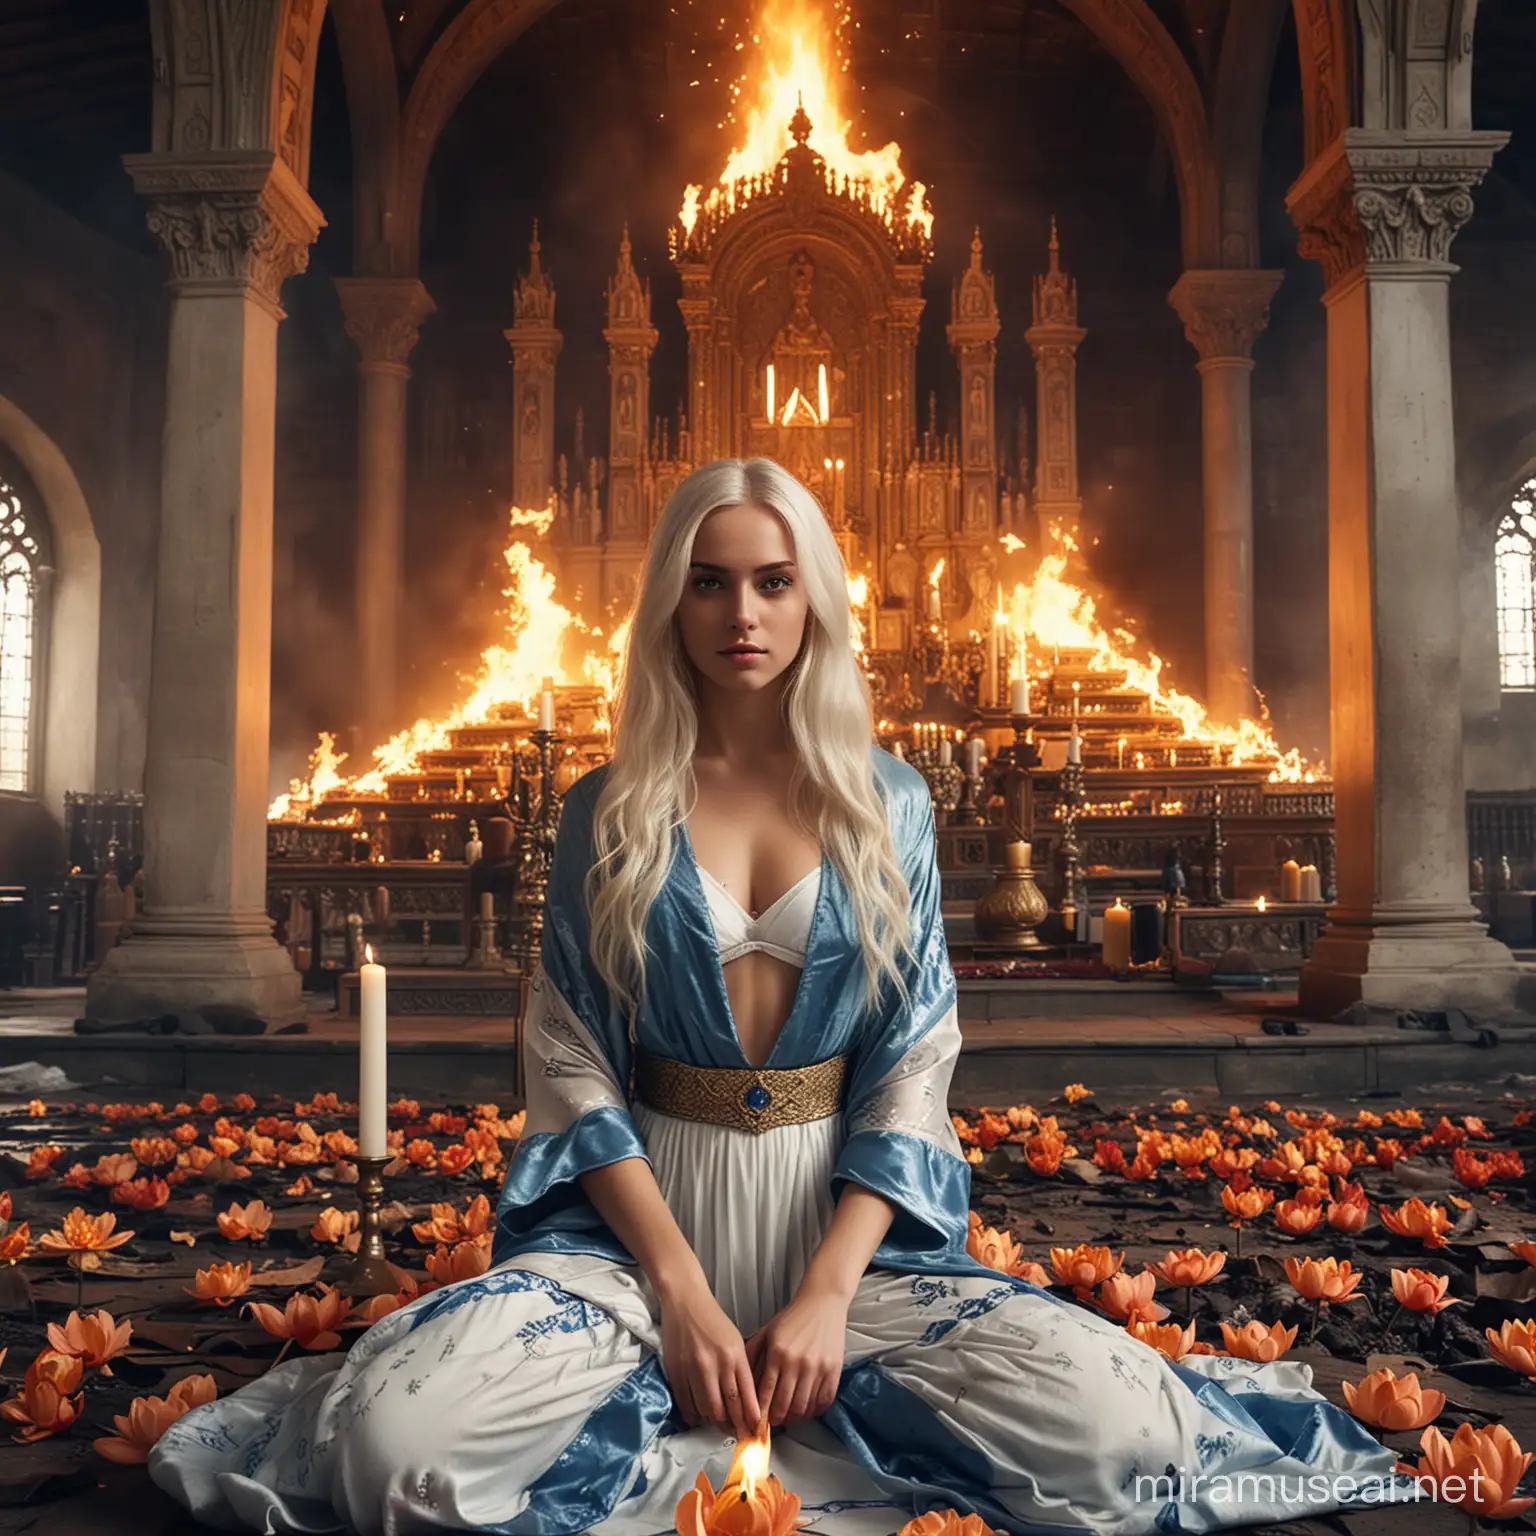 Mysterious Teenage Empress Goddess at Fiery Altar in Old Catholic Church